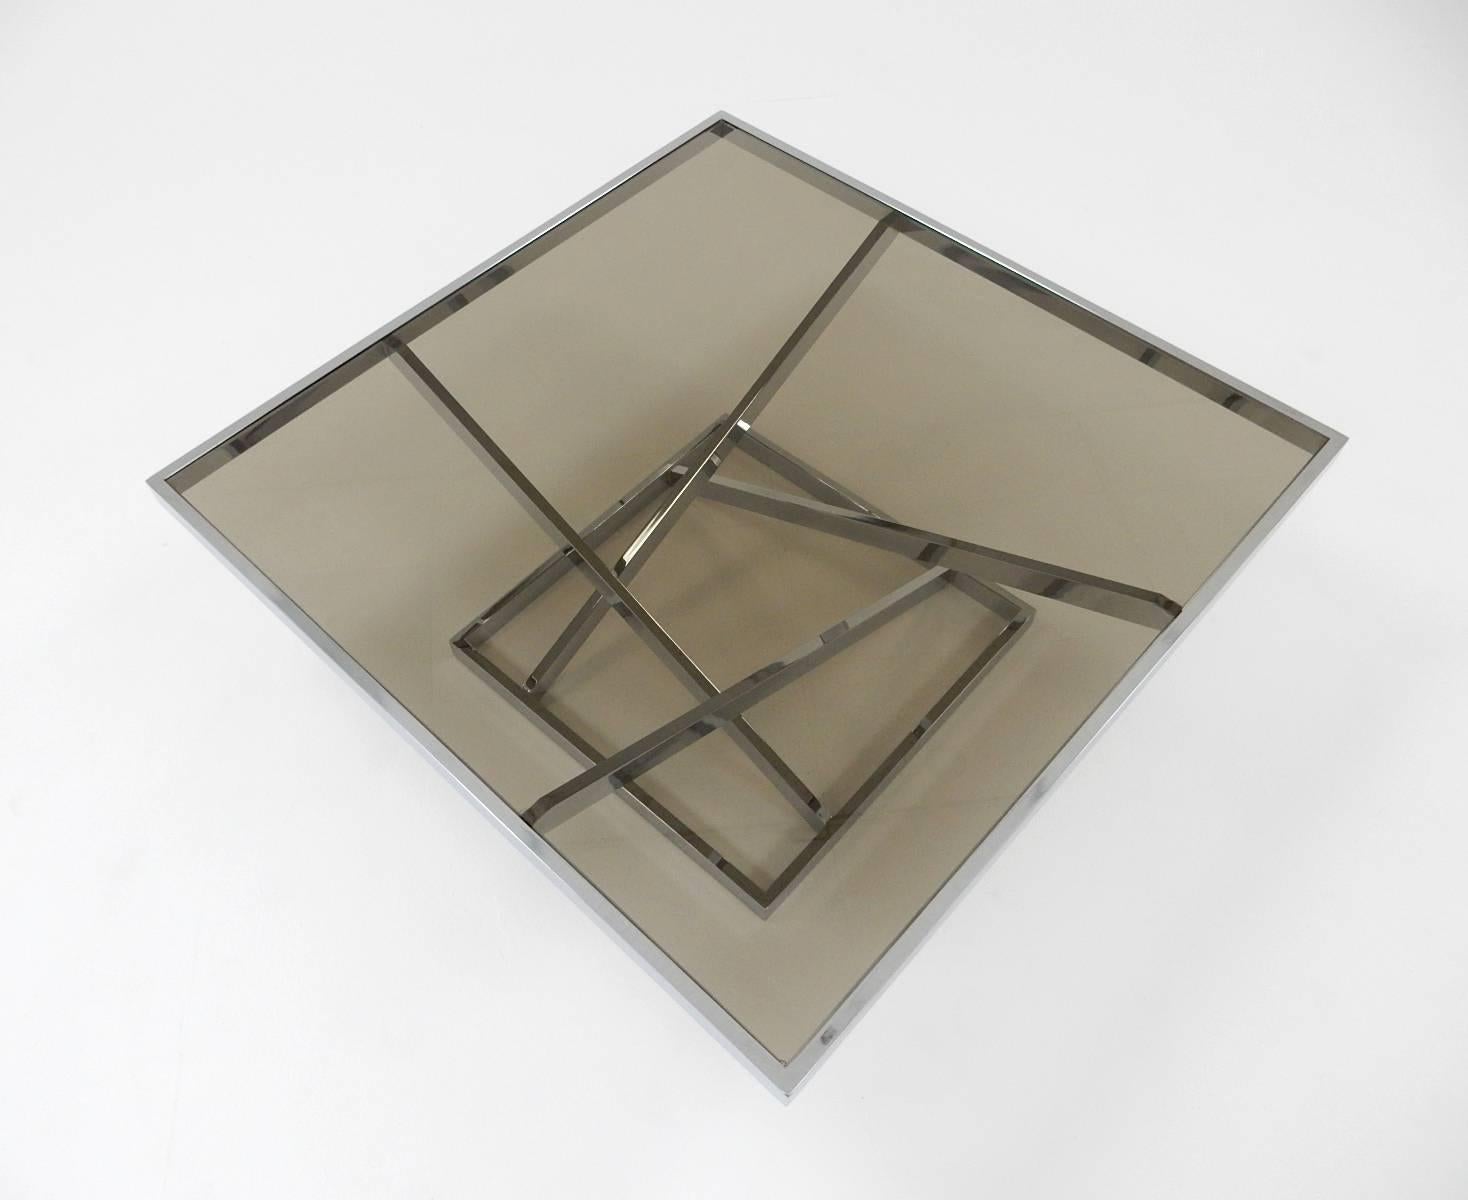 Large architectural design chrome flat steel tube coffee table with smoke glass top by Design Institute of American in the style of Milo Baughman, circa 1970s.